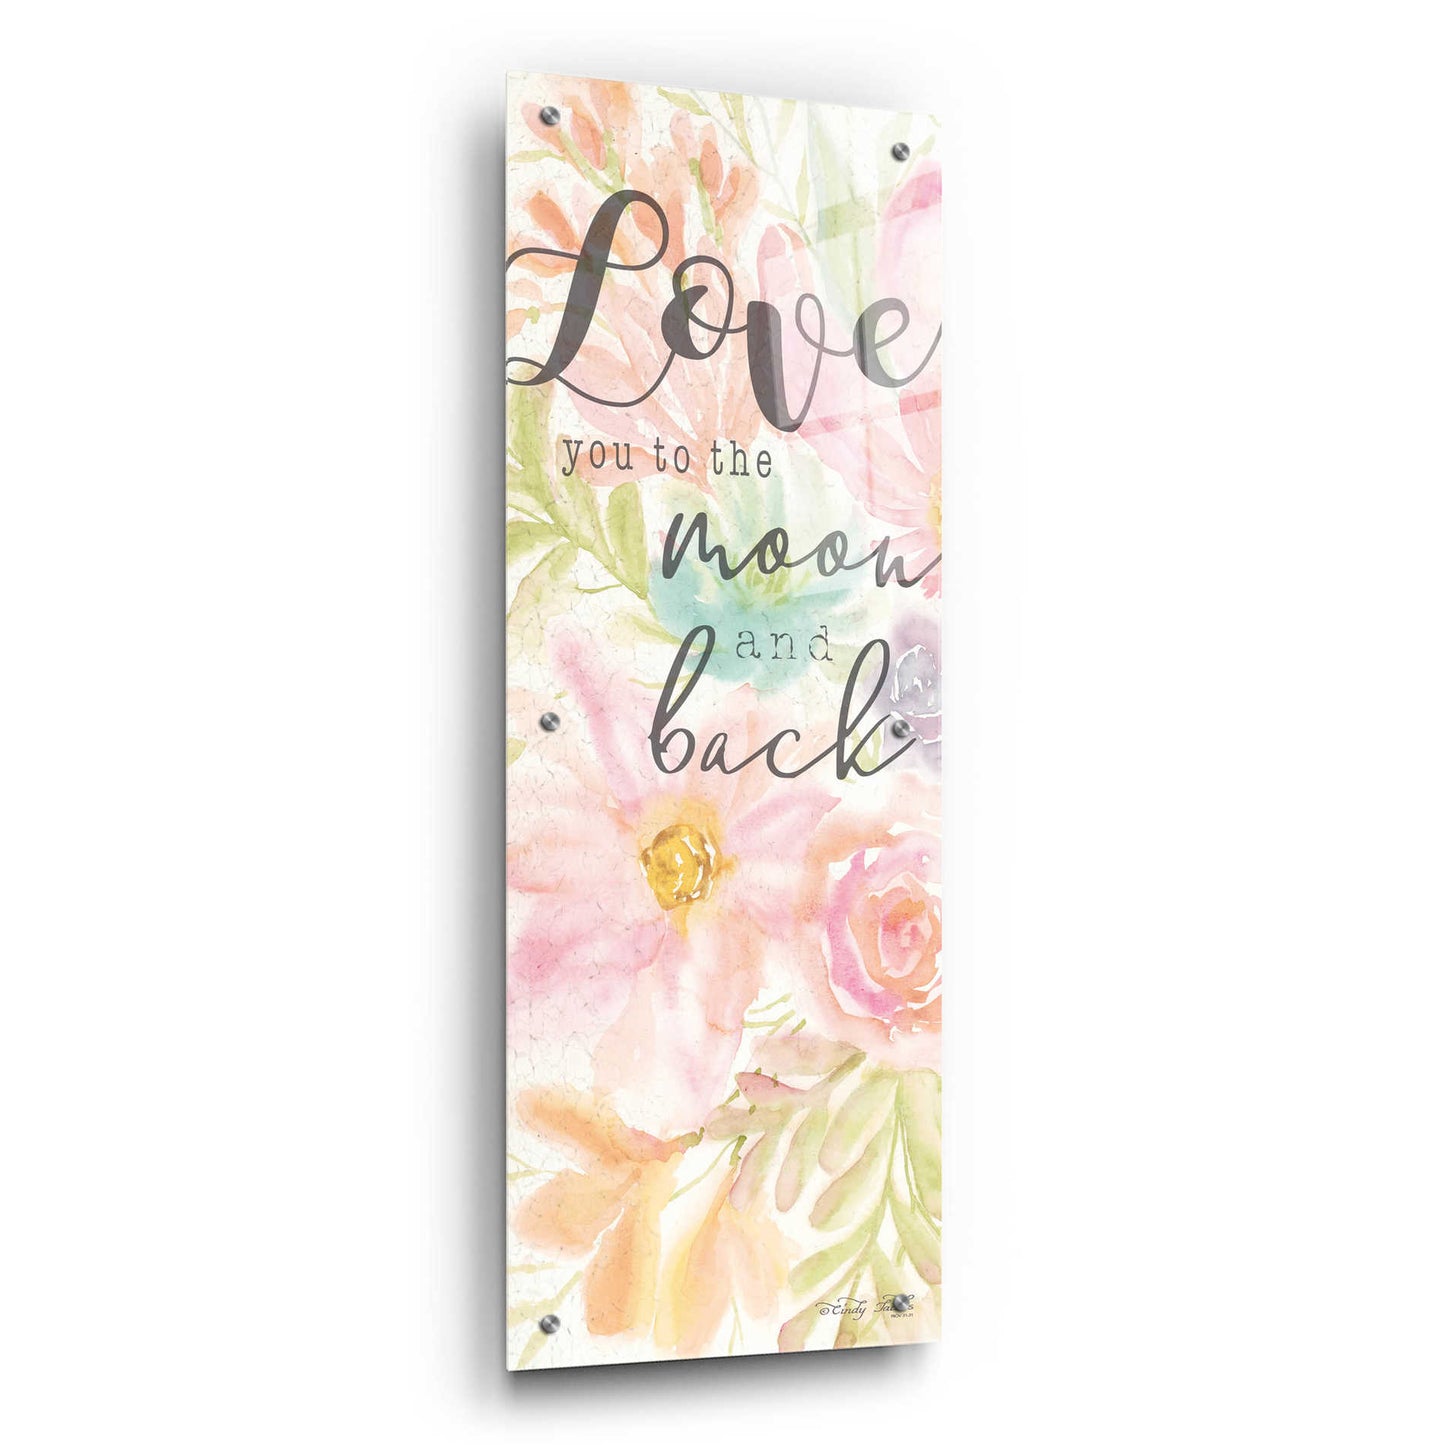 Epic Art 'I Love You to the Moon and Back' by Cindy Jacobs, Acrylic Glass Wall Art,12x36